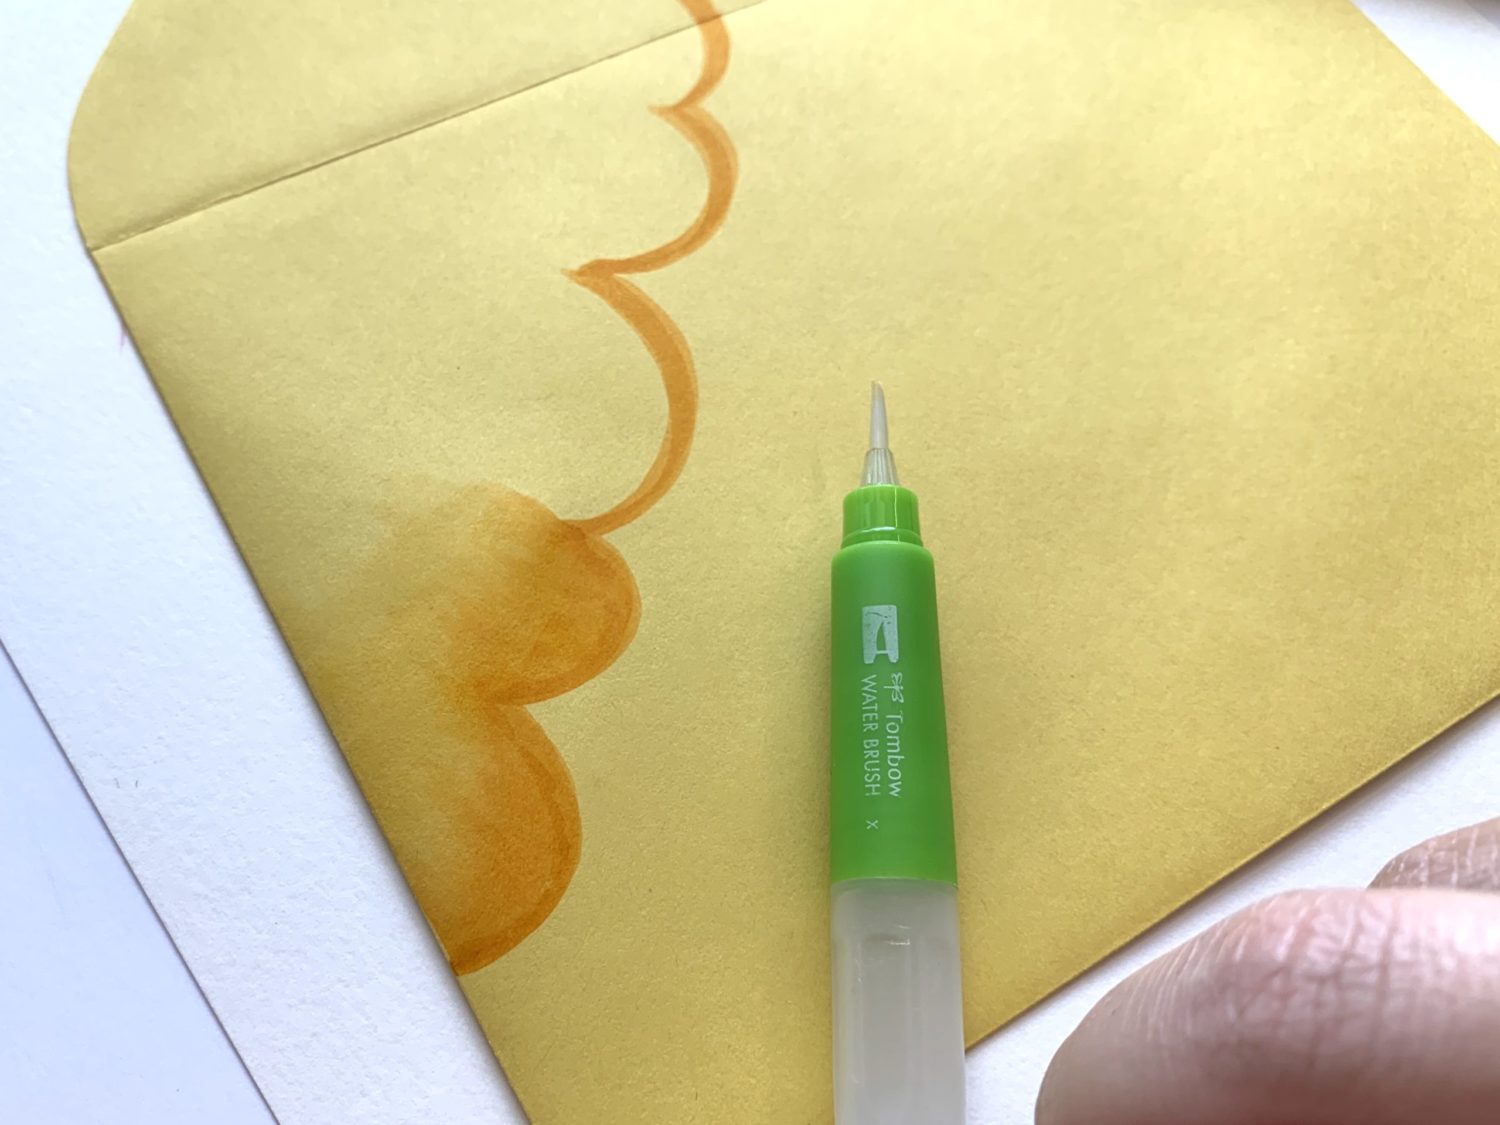 Decorate Happy Mail with Watercolor Clouds - Ali LePere